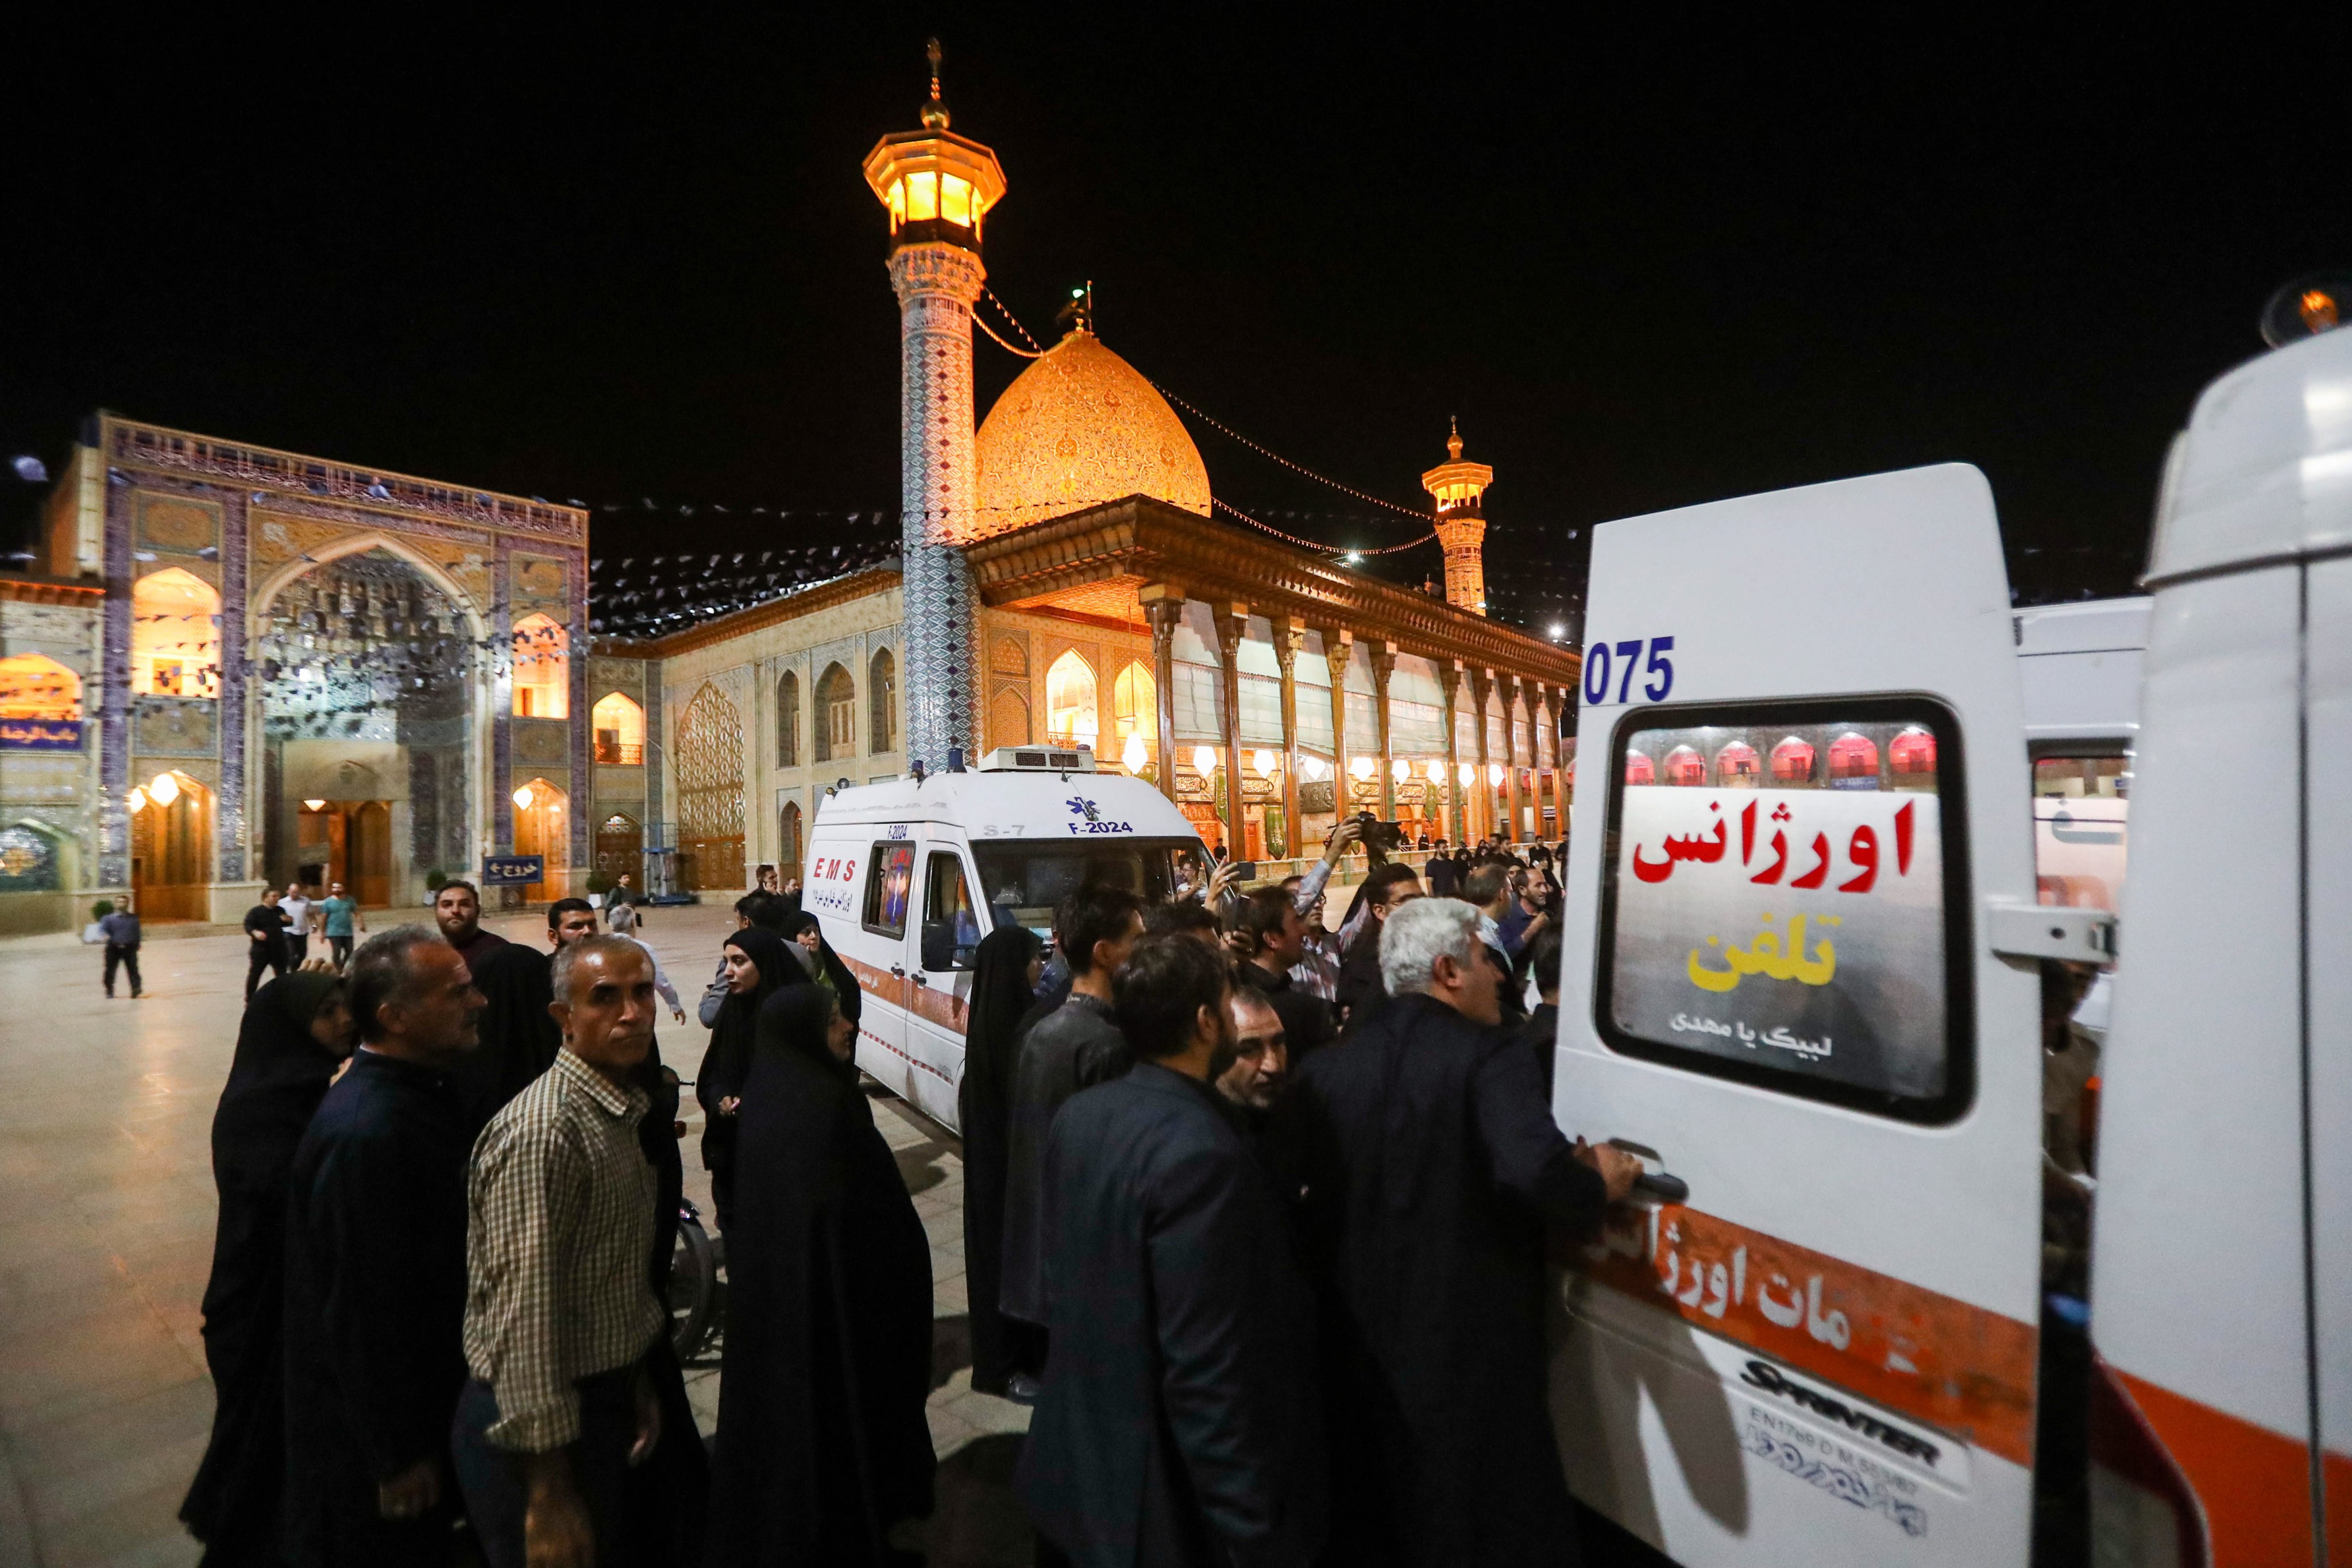 Emergency services arrive at the scene following a shooting at the Shah Cheragh shrine in Shiraz, Iran on Sunday. Photo: EPA-EFE